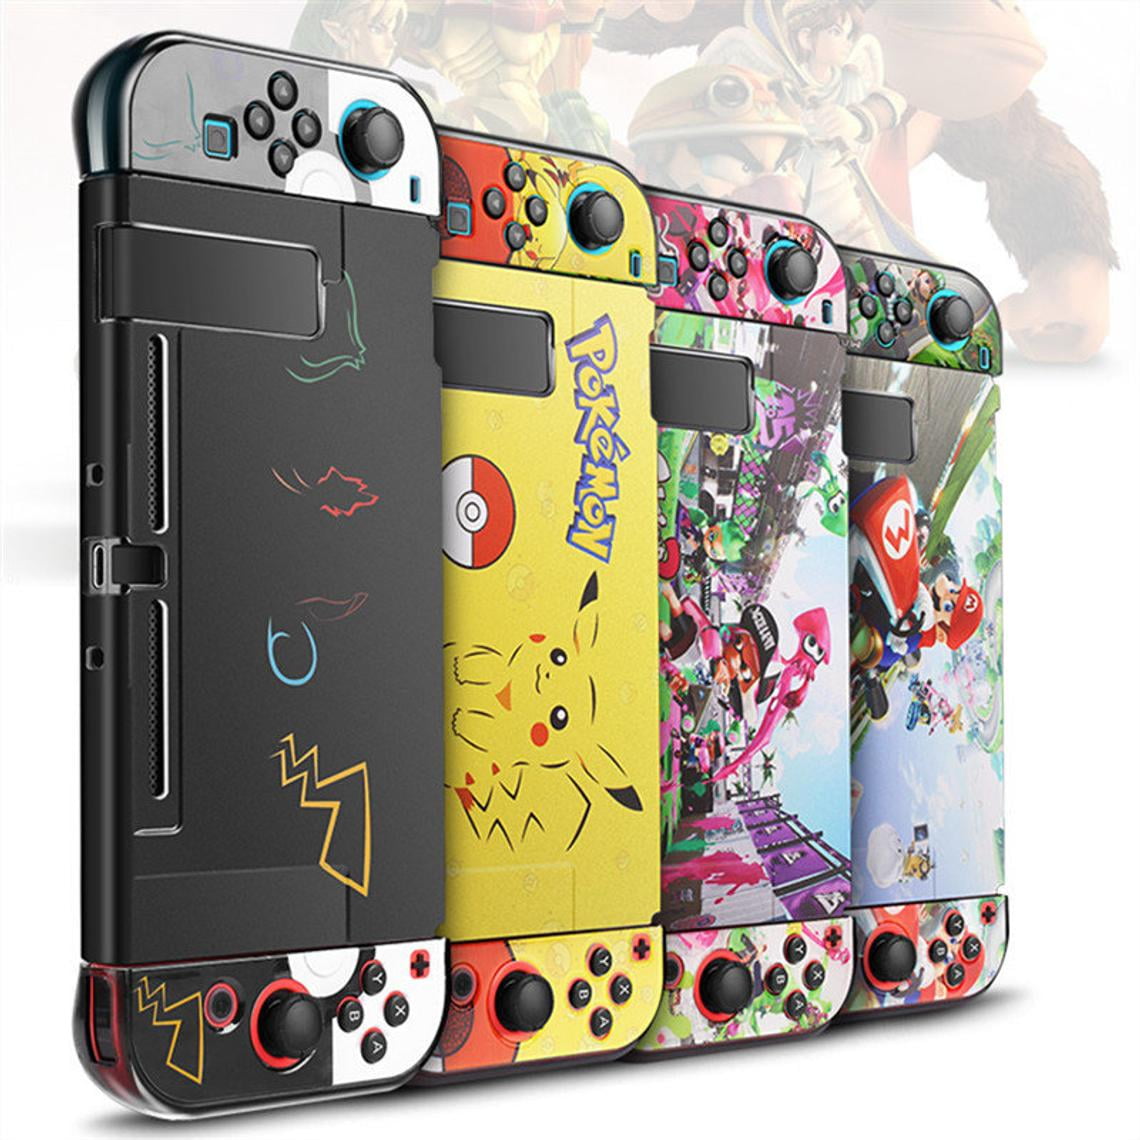 Kawaii Anime For Nintendo Switch Oled Protective Case Soft Tpu Cover  Joycons Controller Game Housing Switch Oled Accessories  Fruugo NL